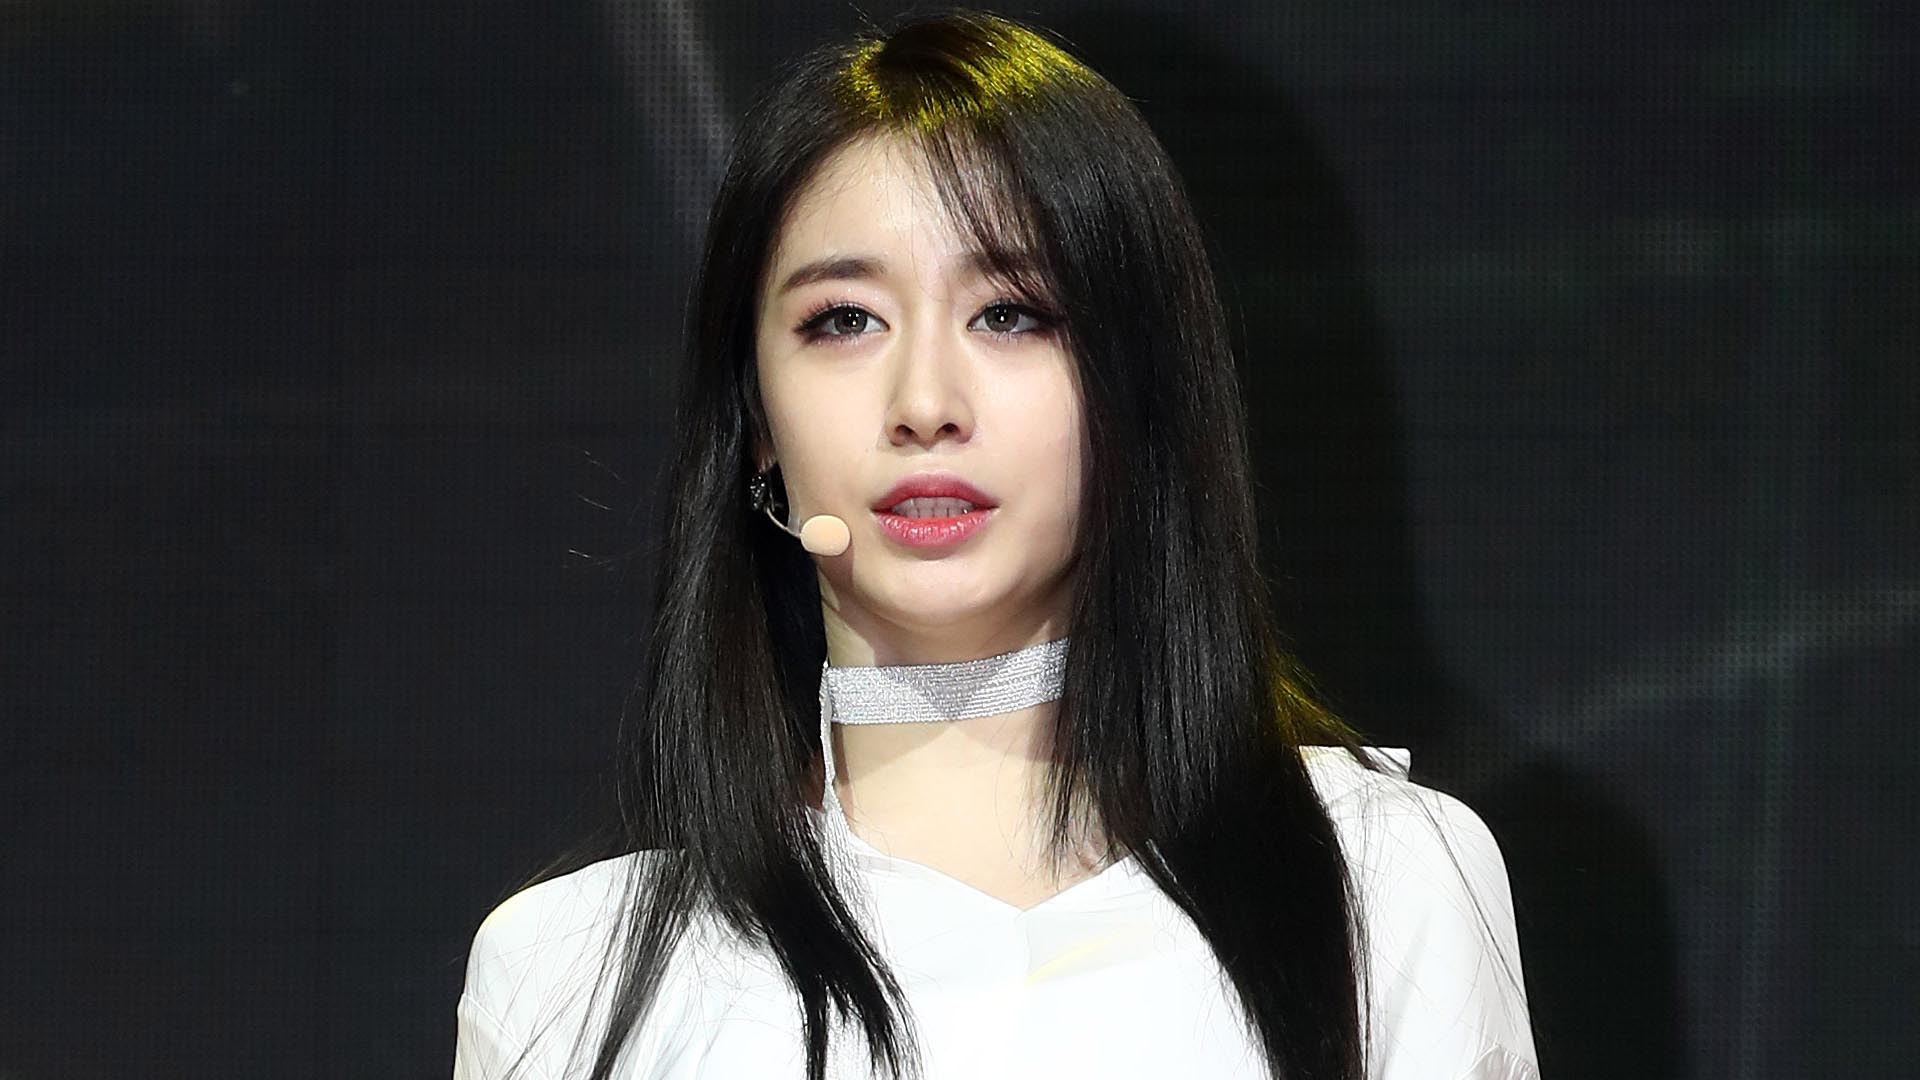 [SNS 핫피플] T-ara Ji-yeon is threatened with murder by an unknown person… “Investigation request”, etc.